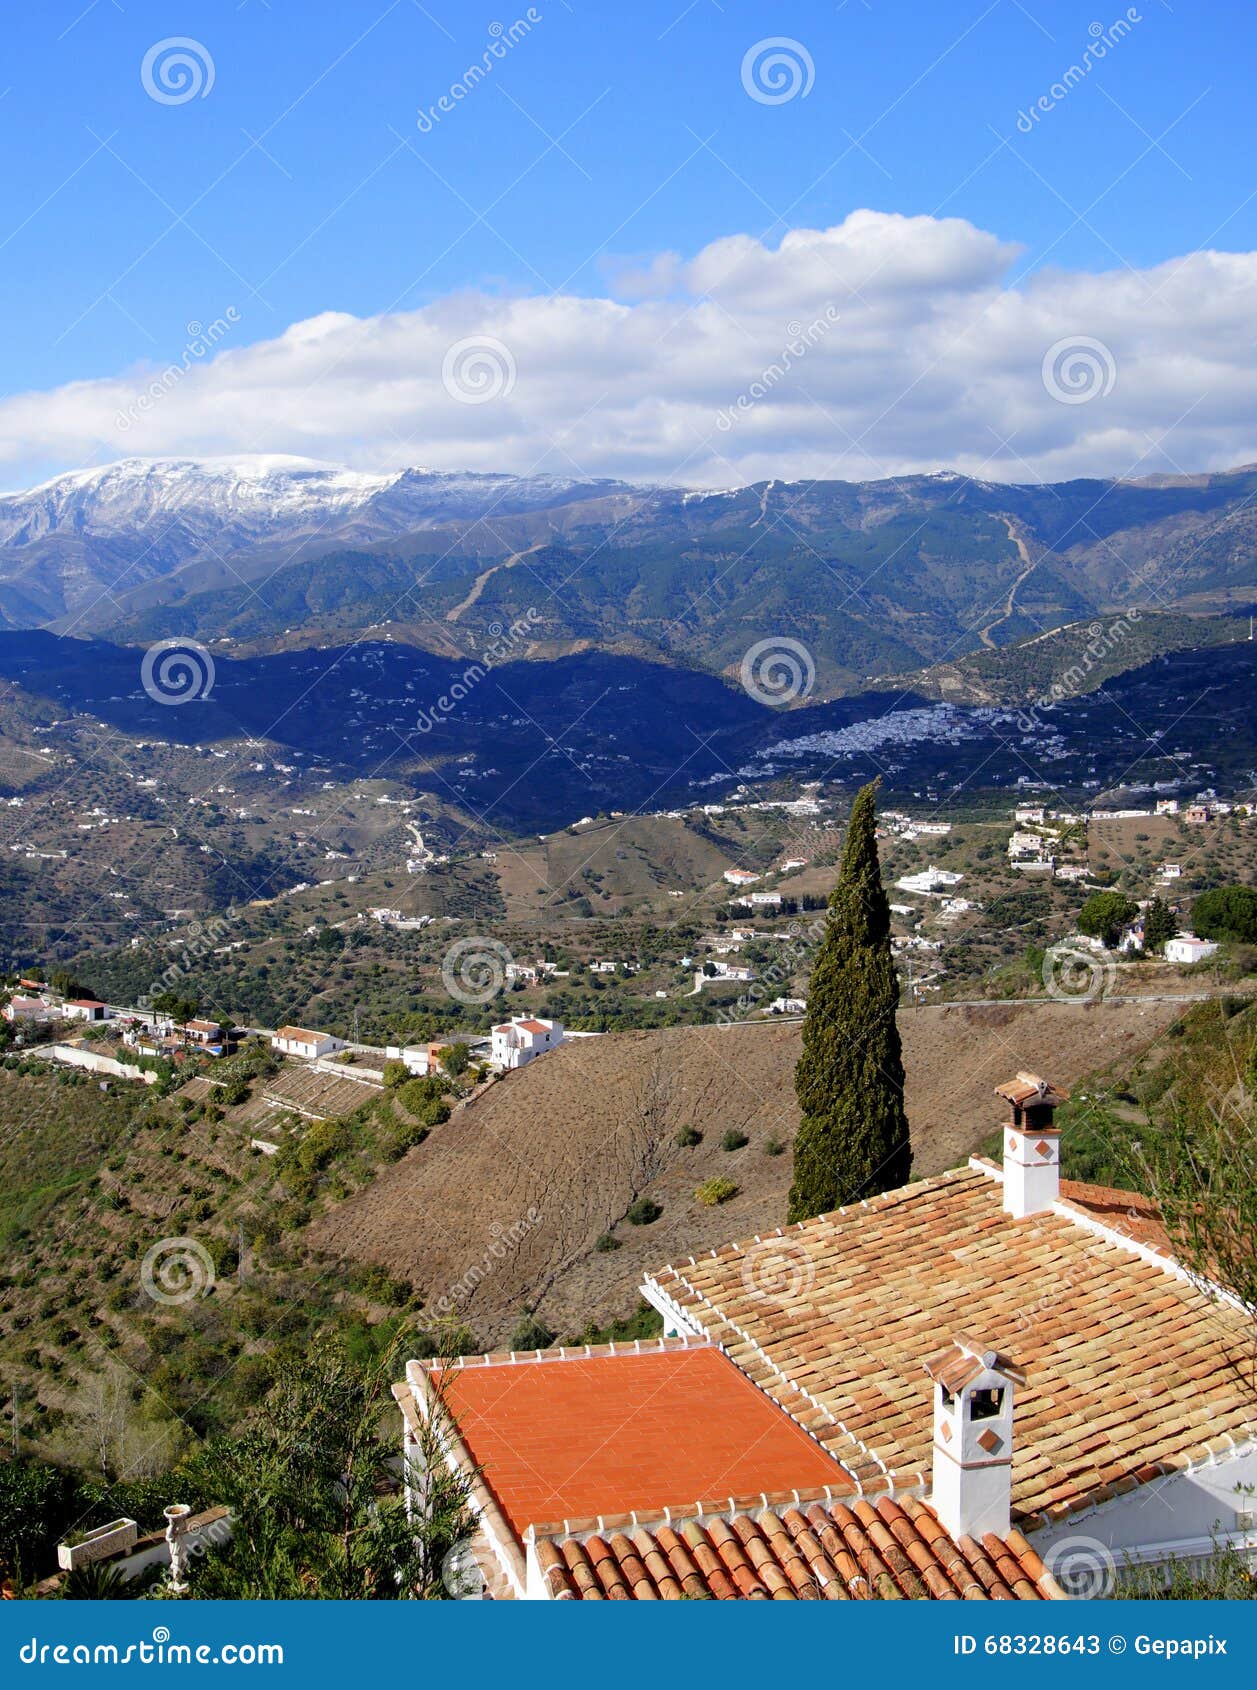 andalusian landscape